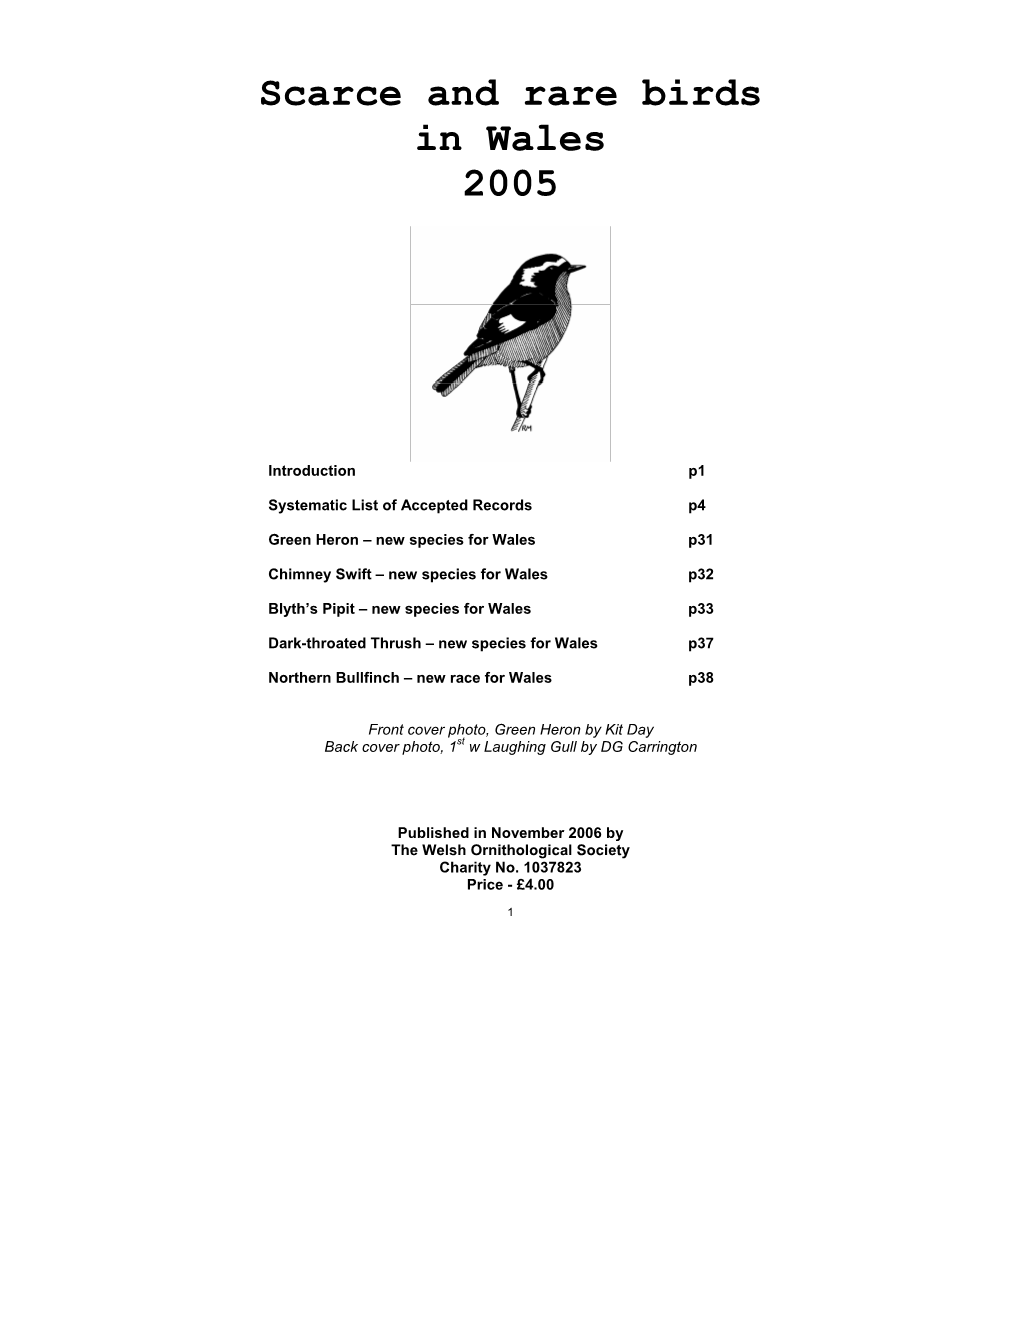 Scarce and Rare Birds in Wales 2005